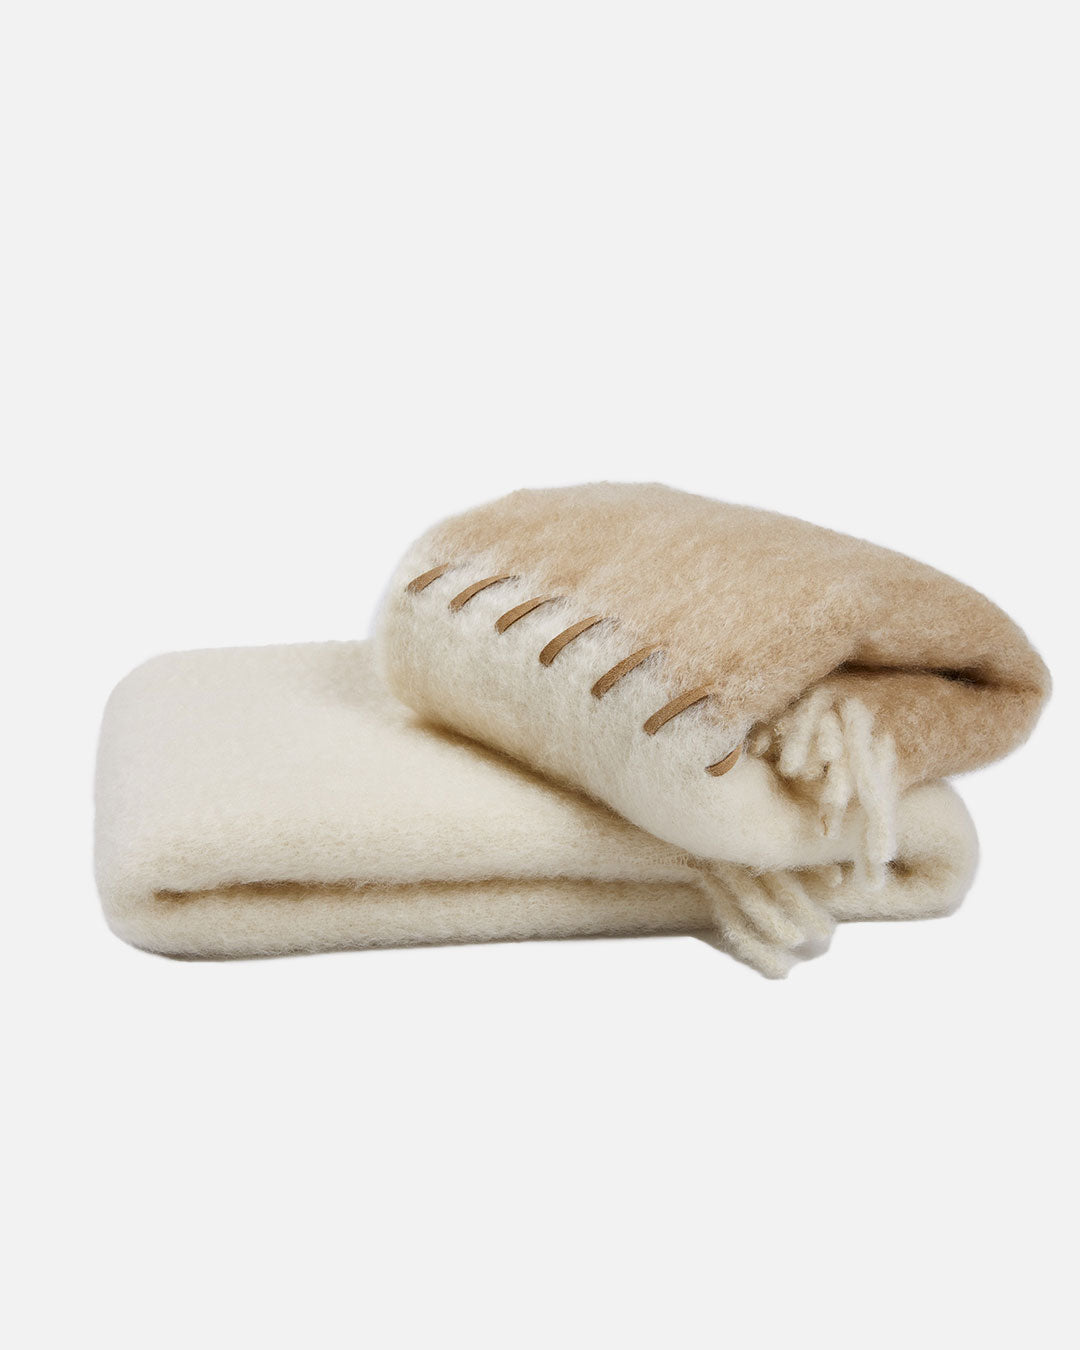 Mohair Throw - Stitching ST-2 Collection